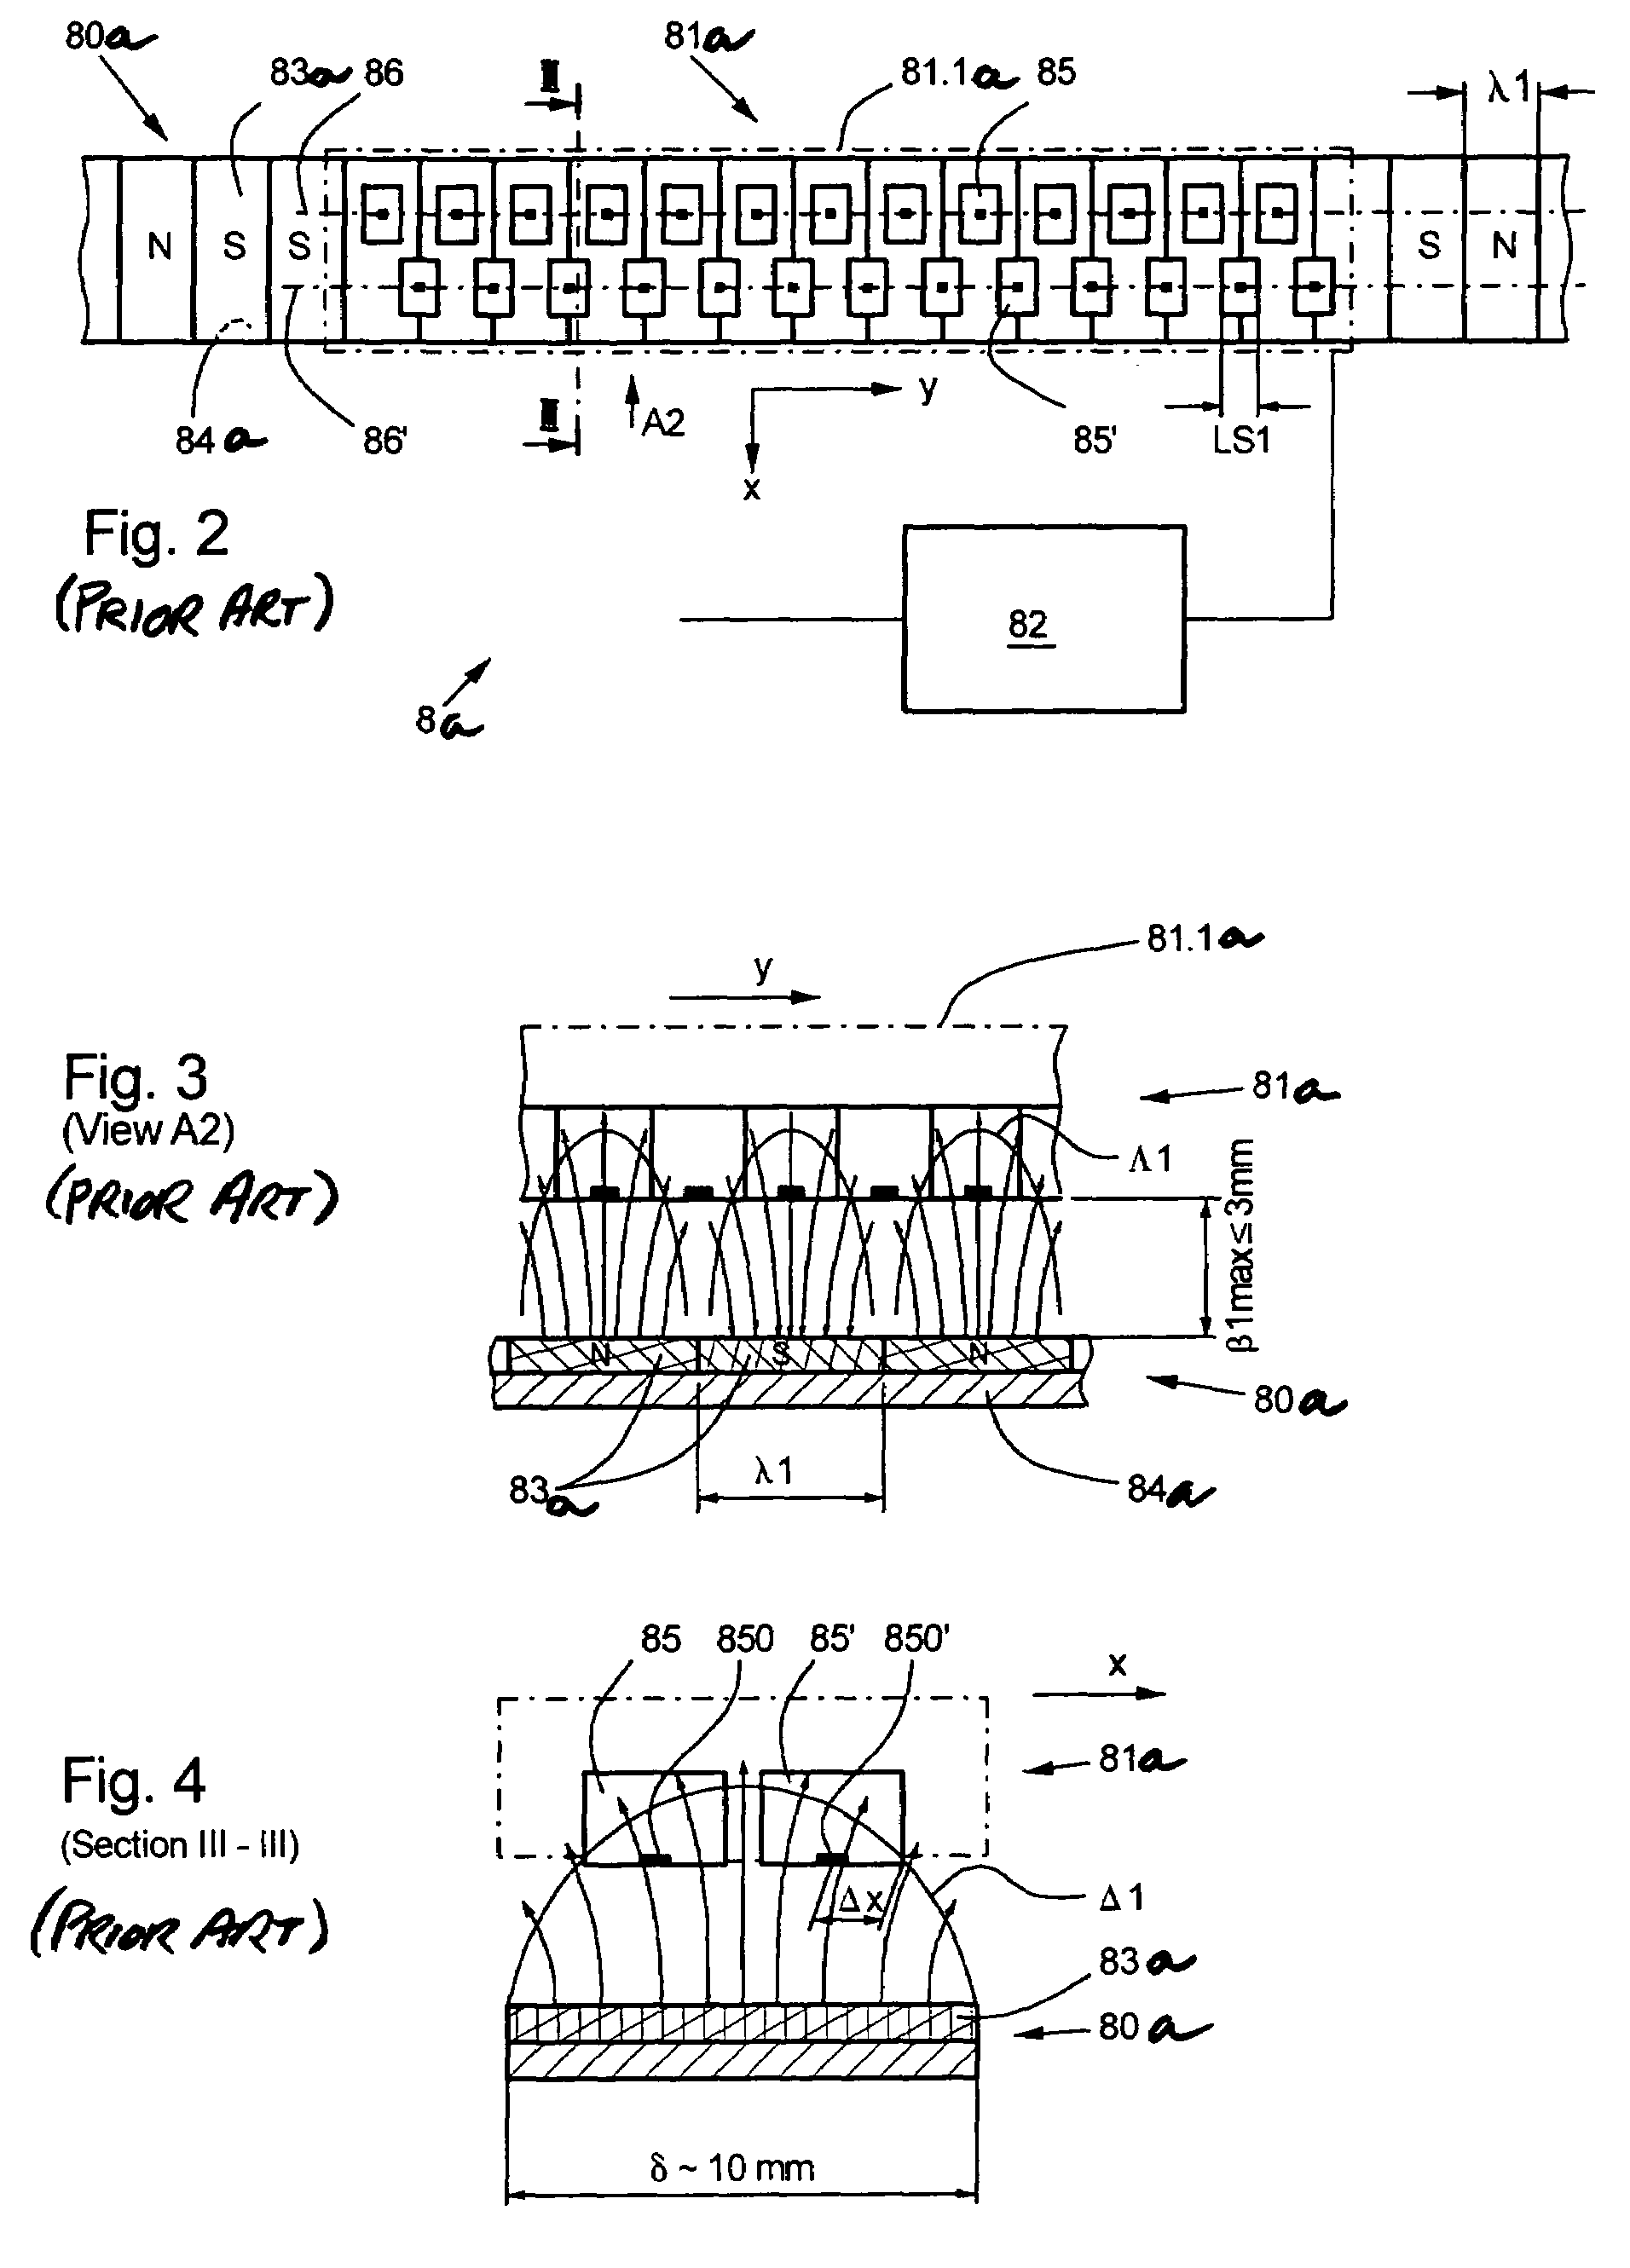 Elevator installation and method for determining and analyzing an elevator car position